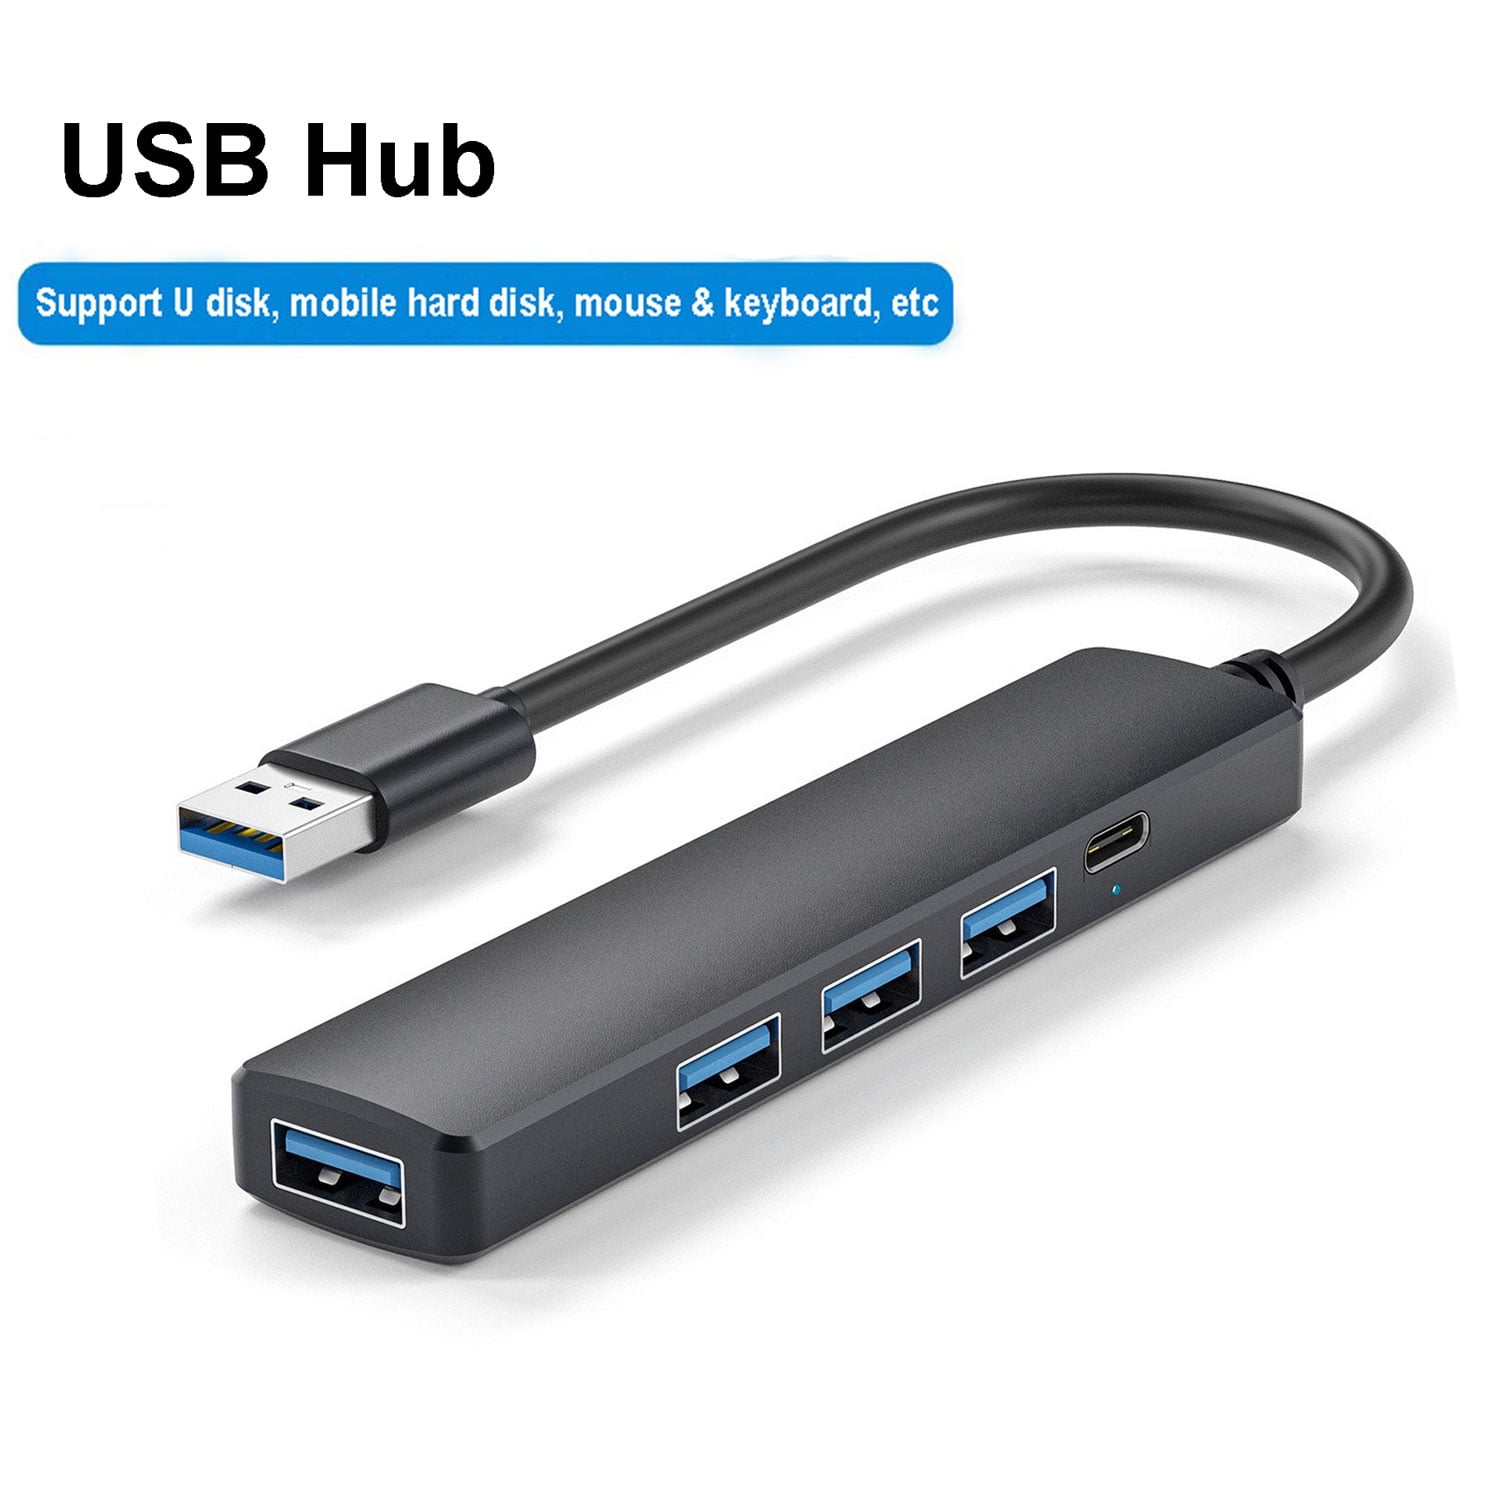 TSUPY USB 3.0 Hub Multi USB HUB with 4ft/48inch Extended Cable, SD/TF Card  Reader & 3 USB 3.0 Ports Compatible for PC, Laptops, Tablets, MacBook, Mac  Mini, iMac Pro 